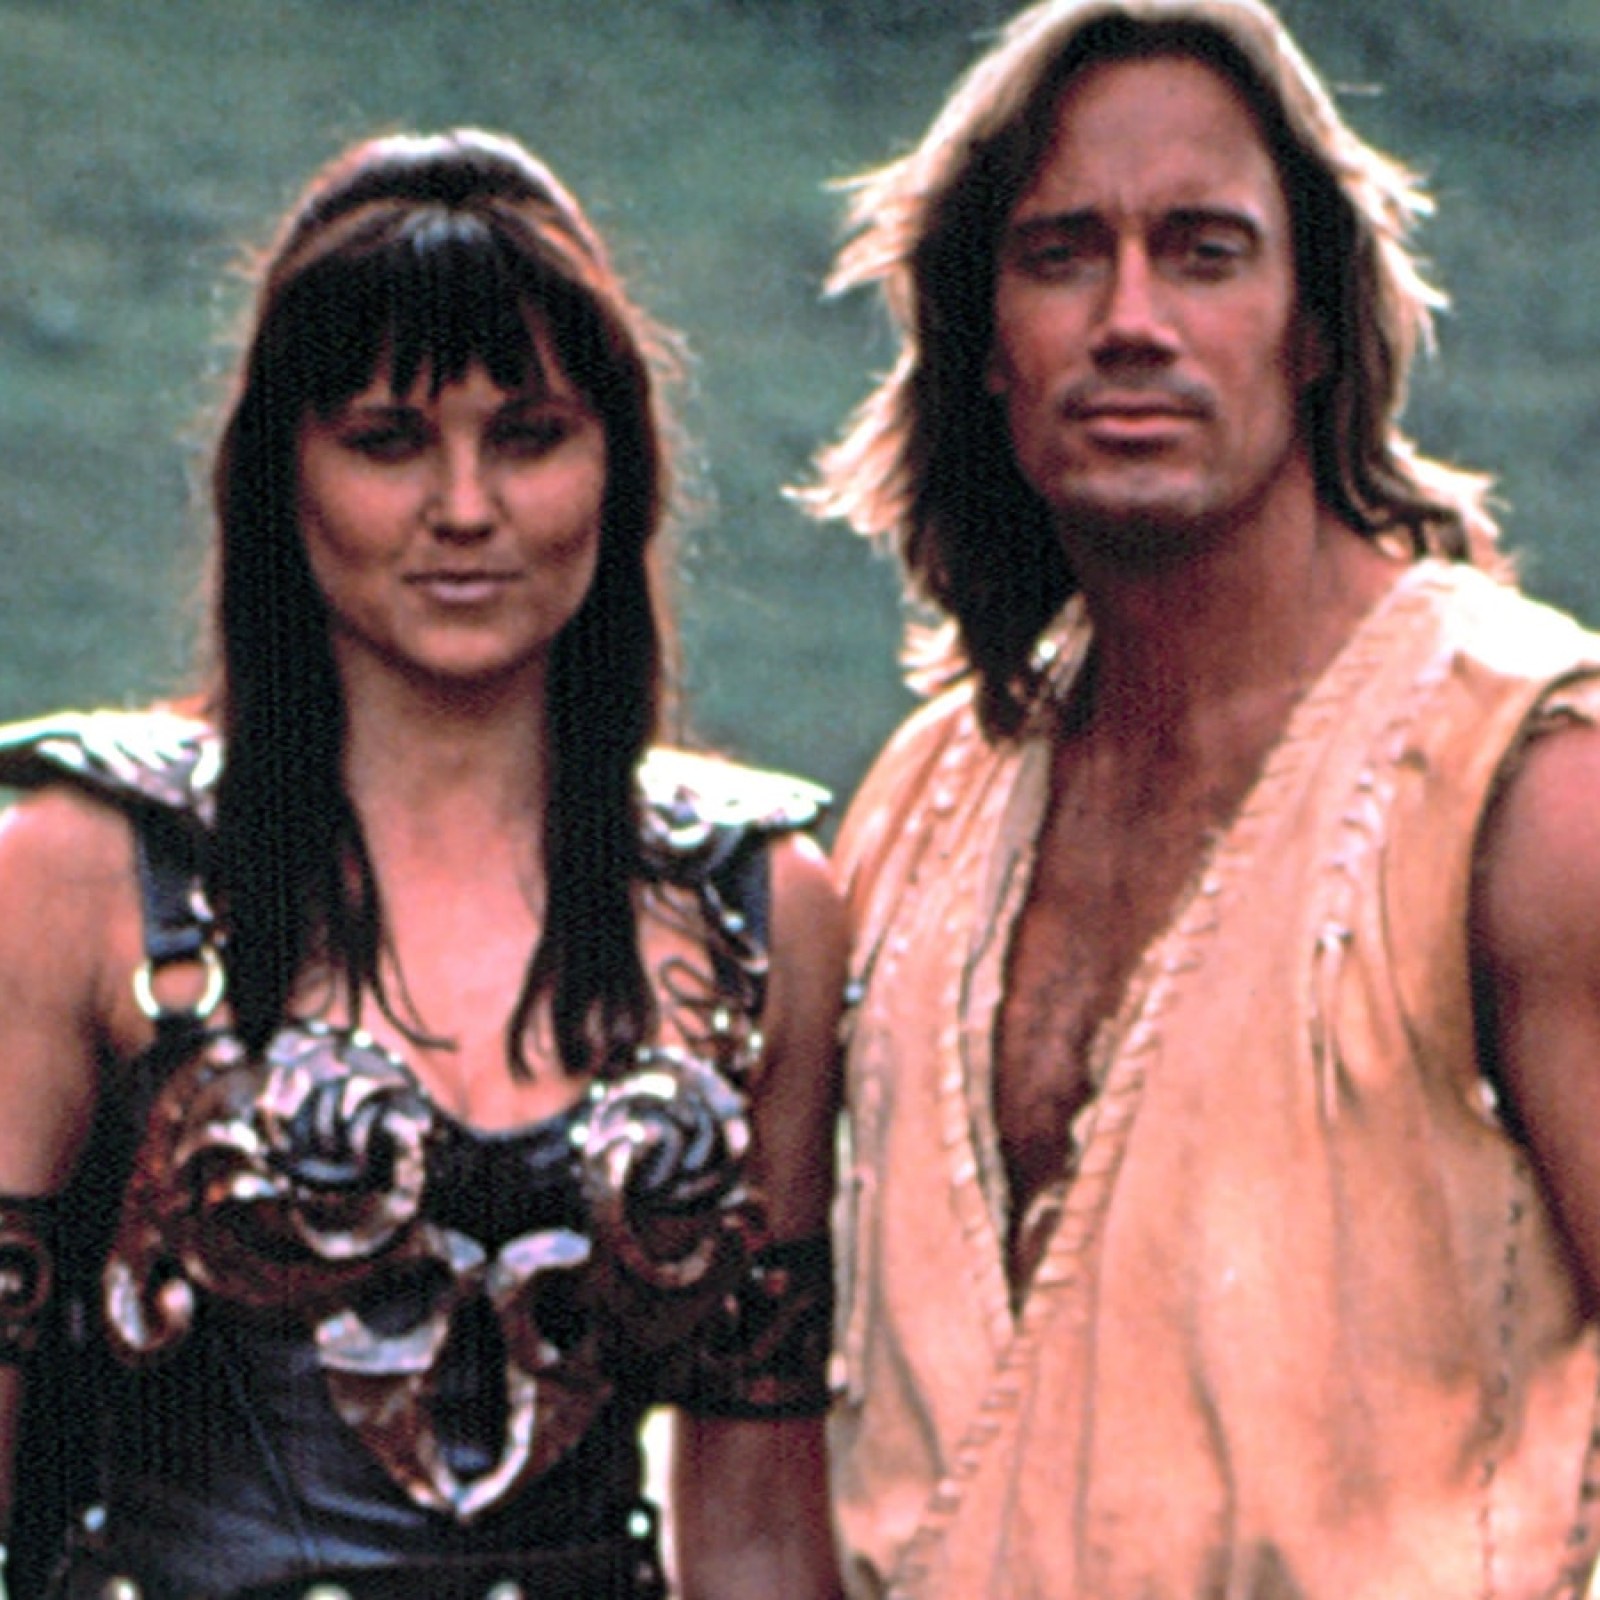 kevin sorbo wife on hercules